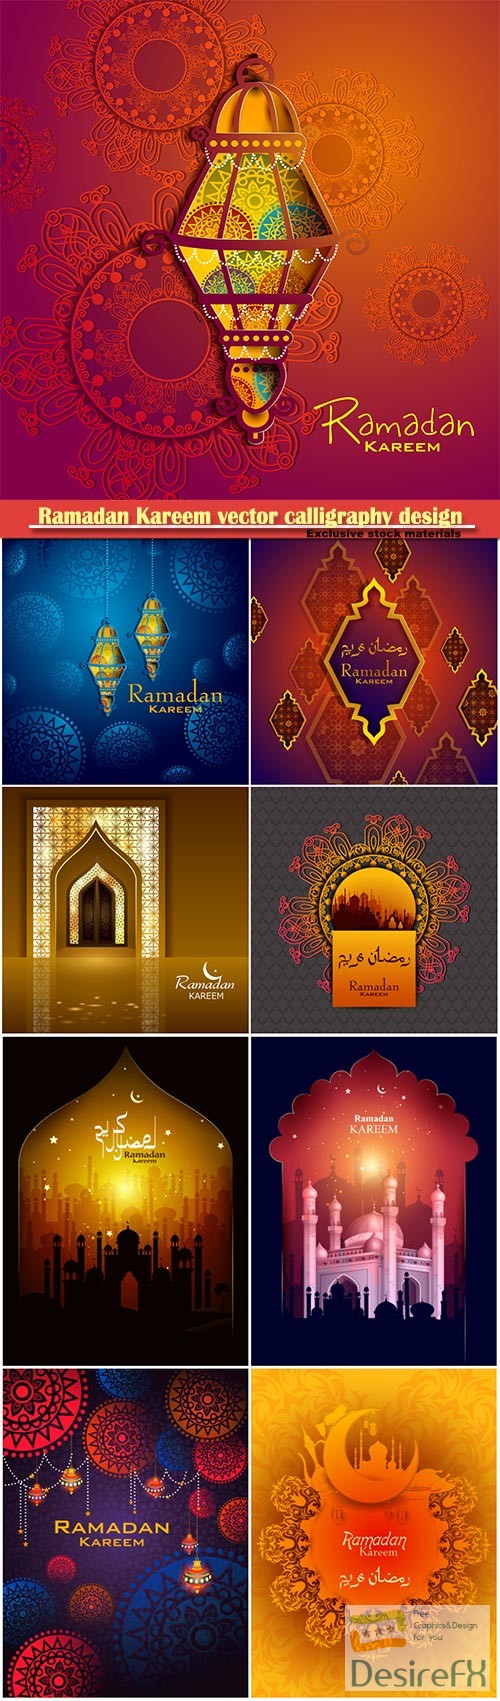 Ramadan Kareem vector calligraphy design with decorative floral pattern, mosque silhouette, crescent and glittering islamic background # 43